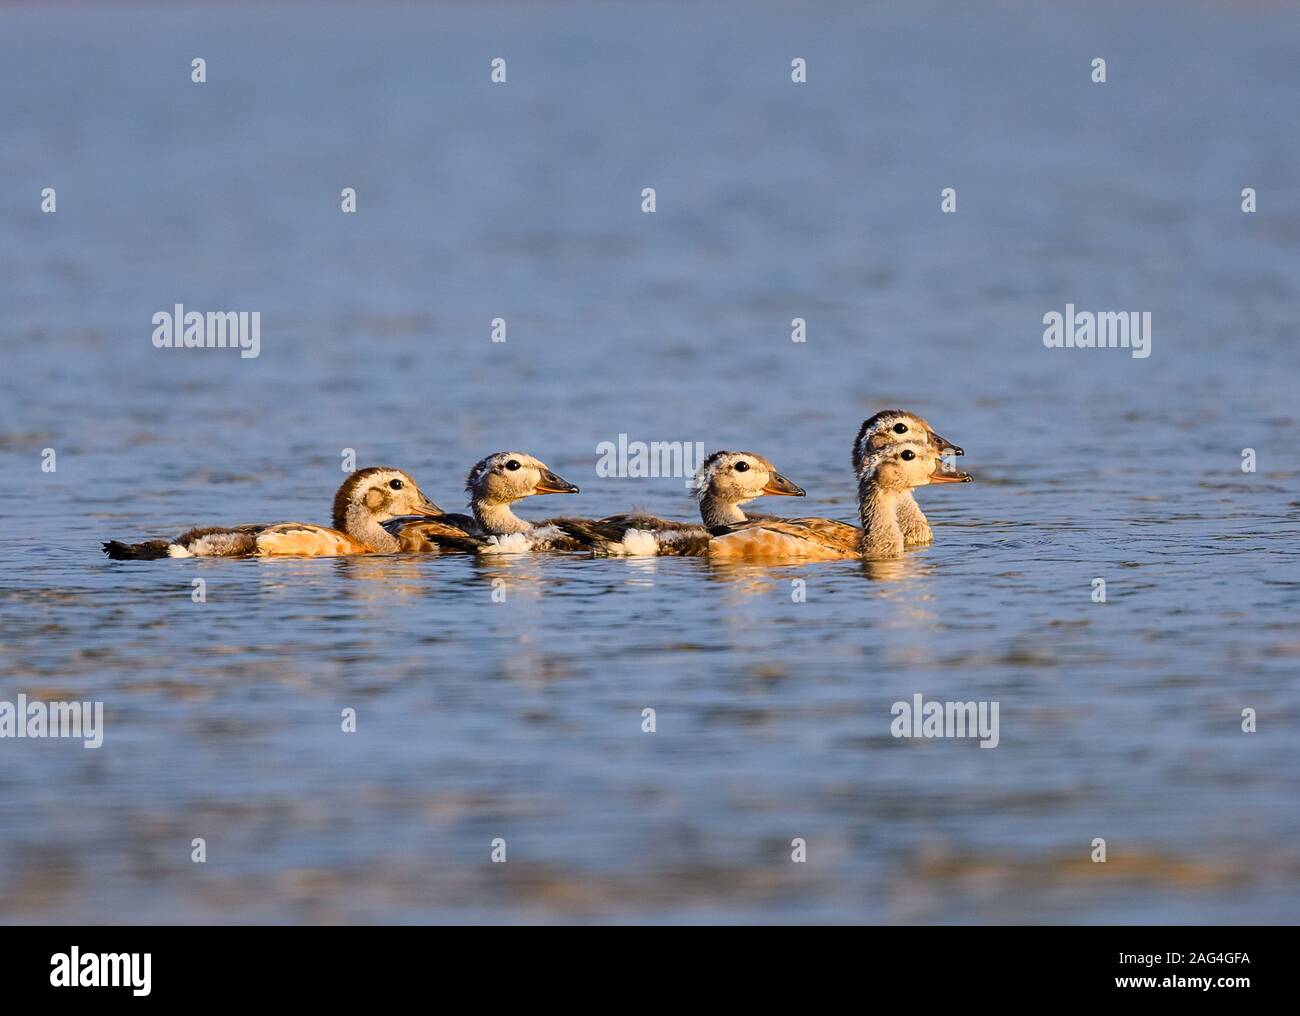 A group of juvenile of Orinoco Geese (Neochen jubata) swim in the Rio Javaes in the Amazon Basin. Tocantins, Brazil. Stock Photo